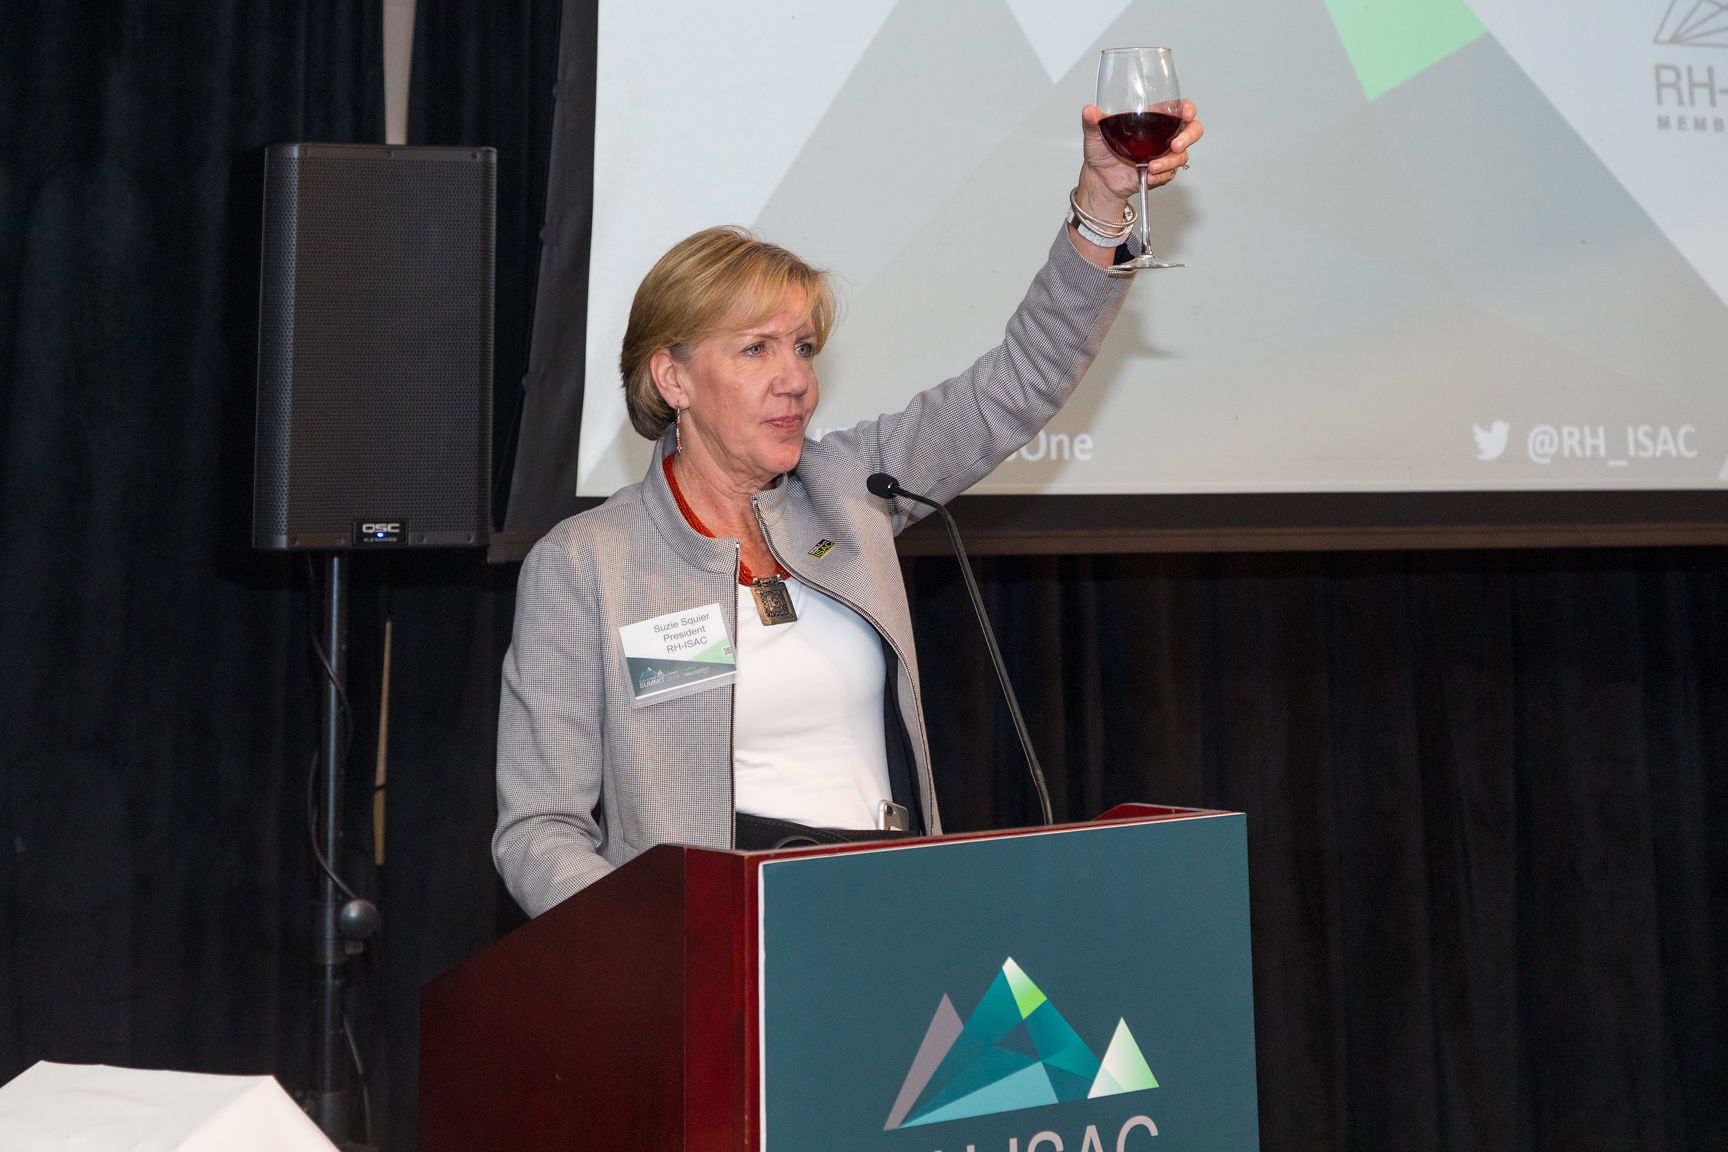 A women in a grey jacket lifts a glass of wine at a podium